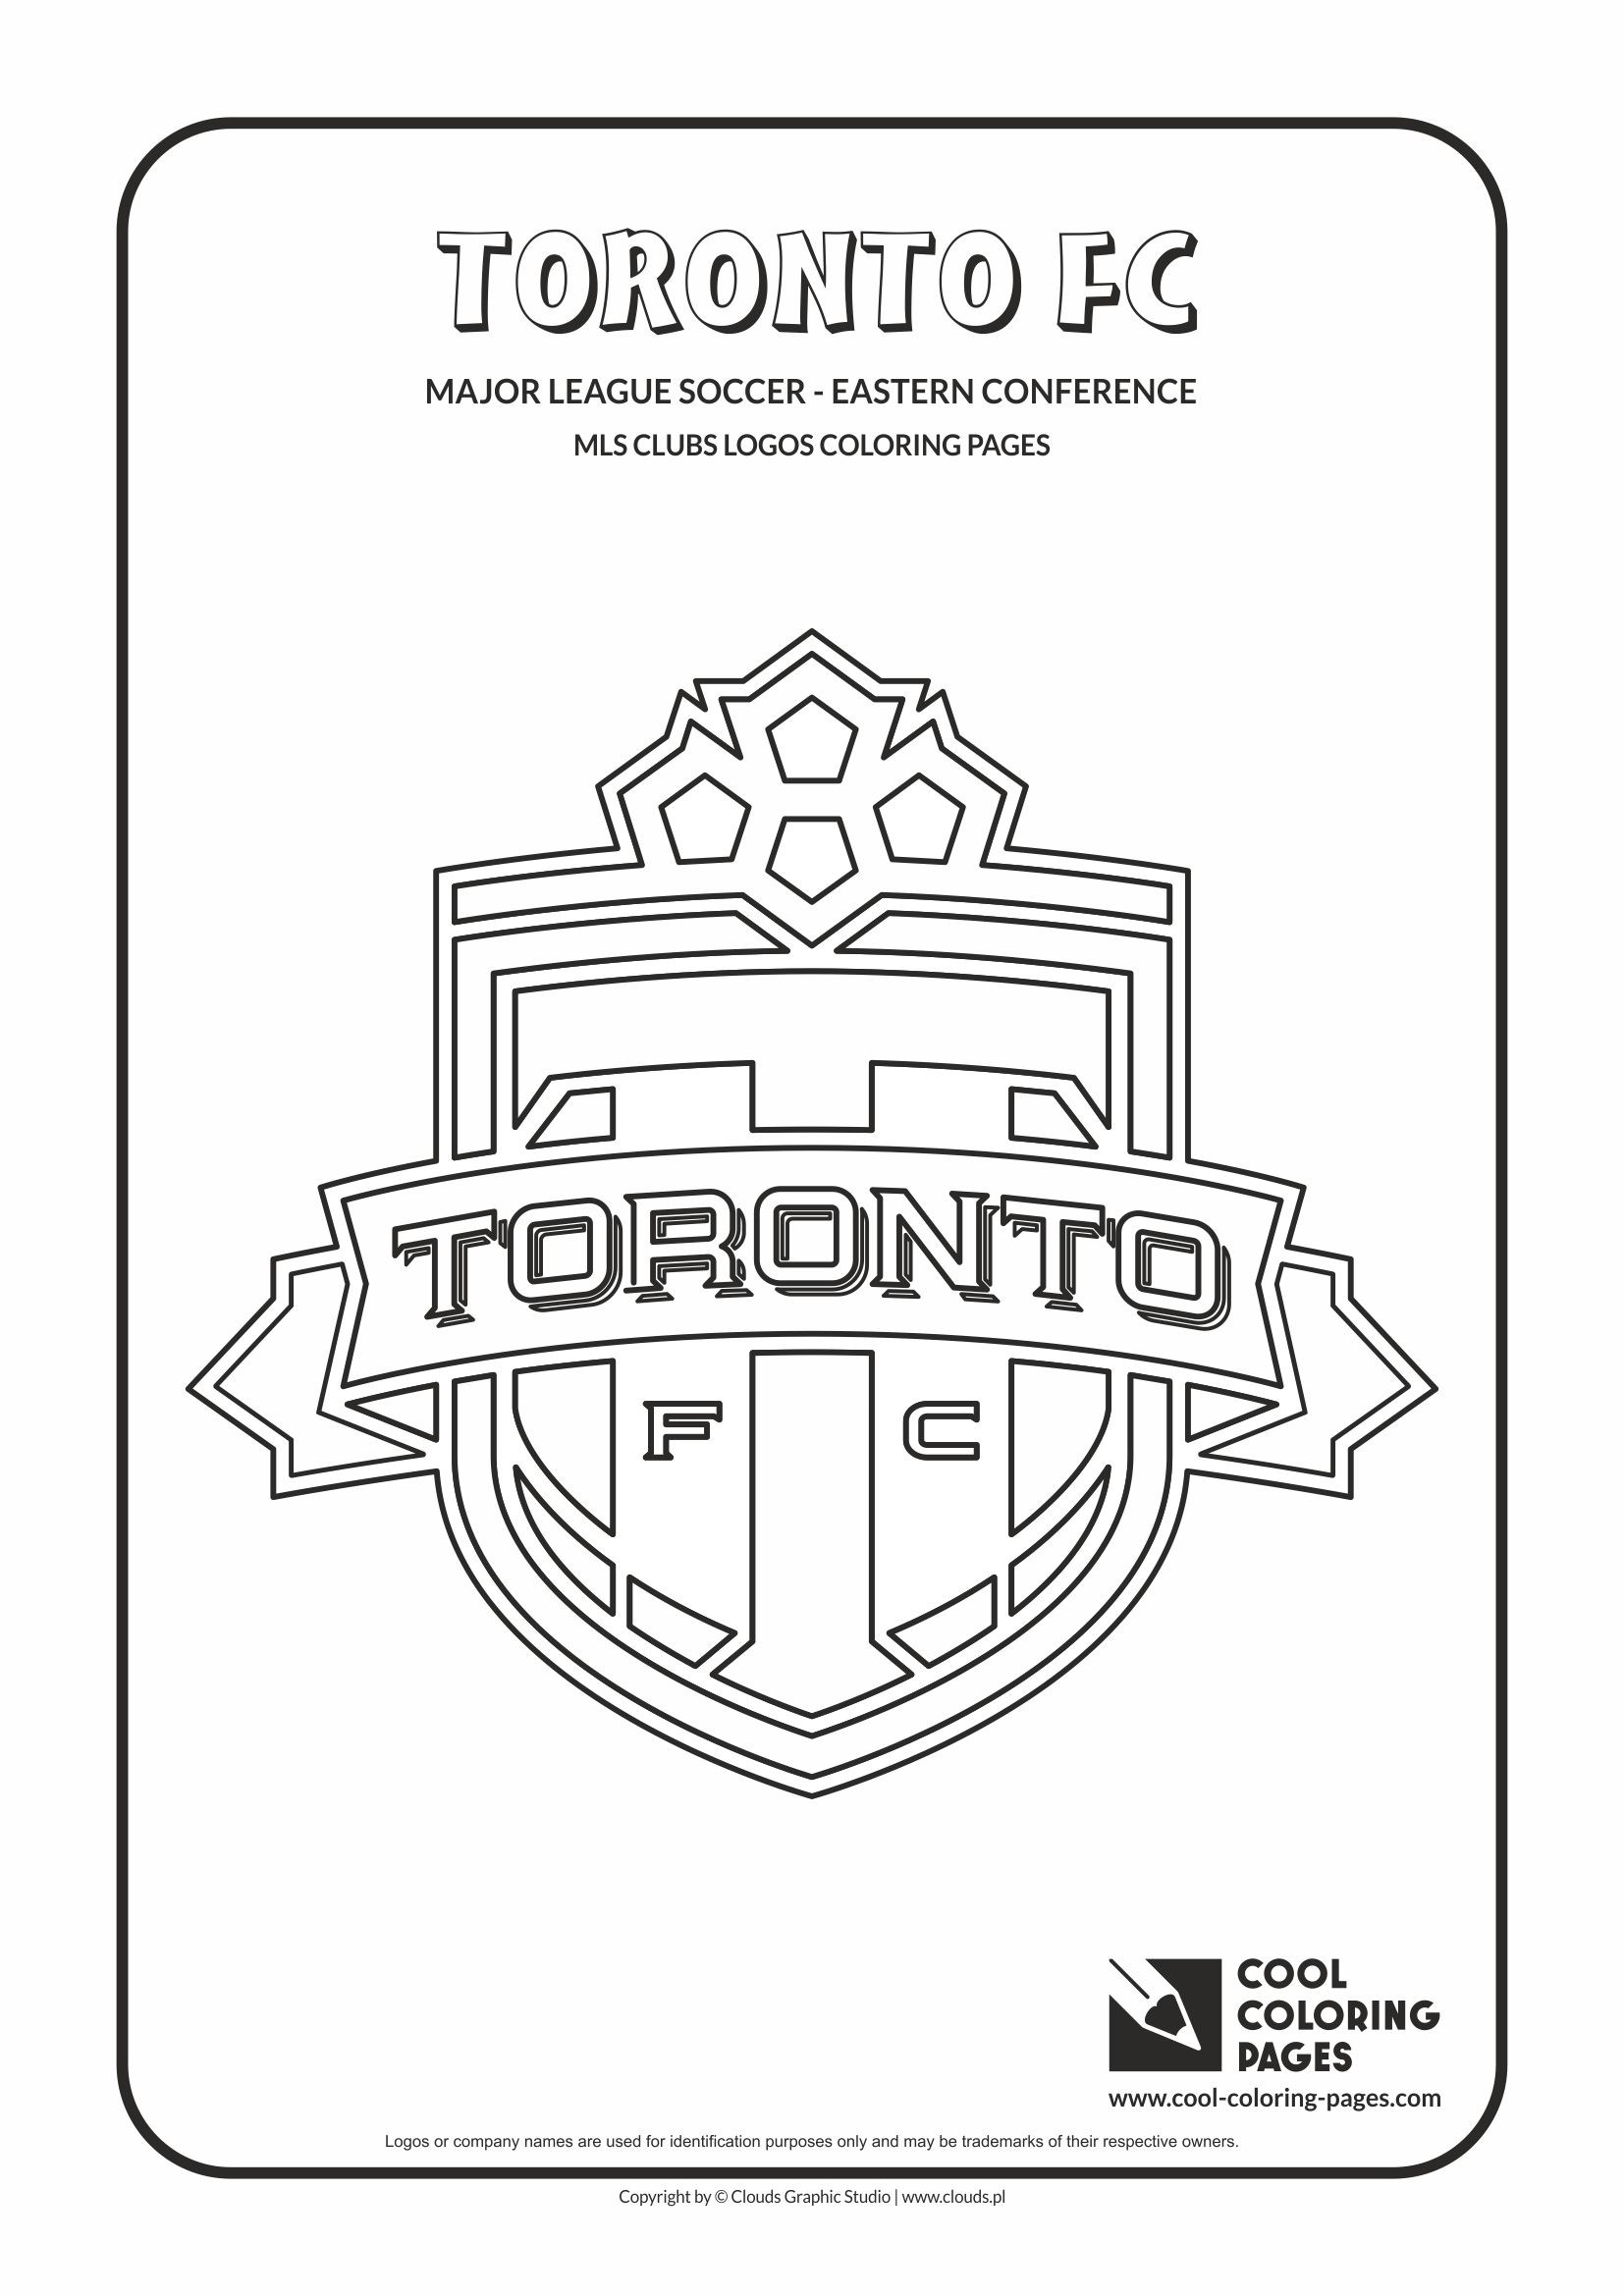 Cool Coloring Pages MLS soccer clubs logos coloring pages ...